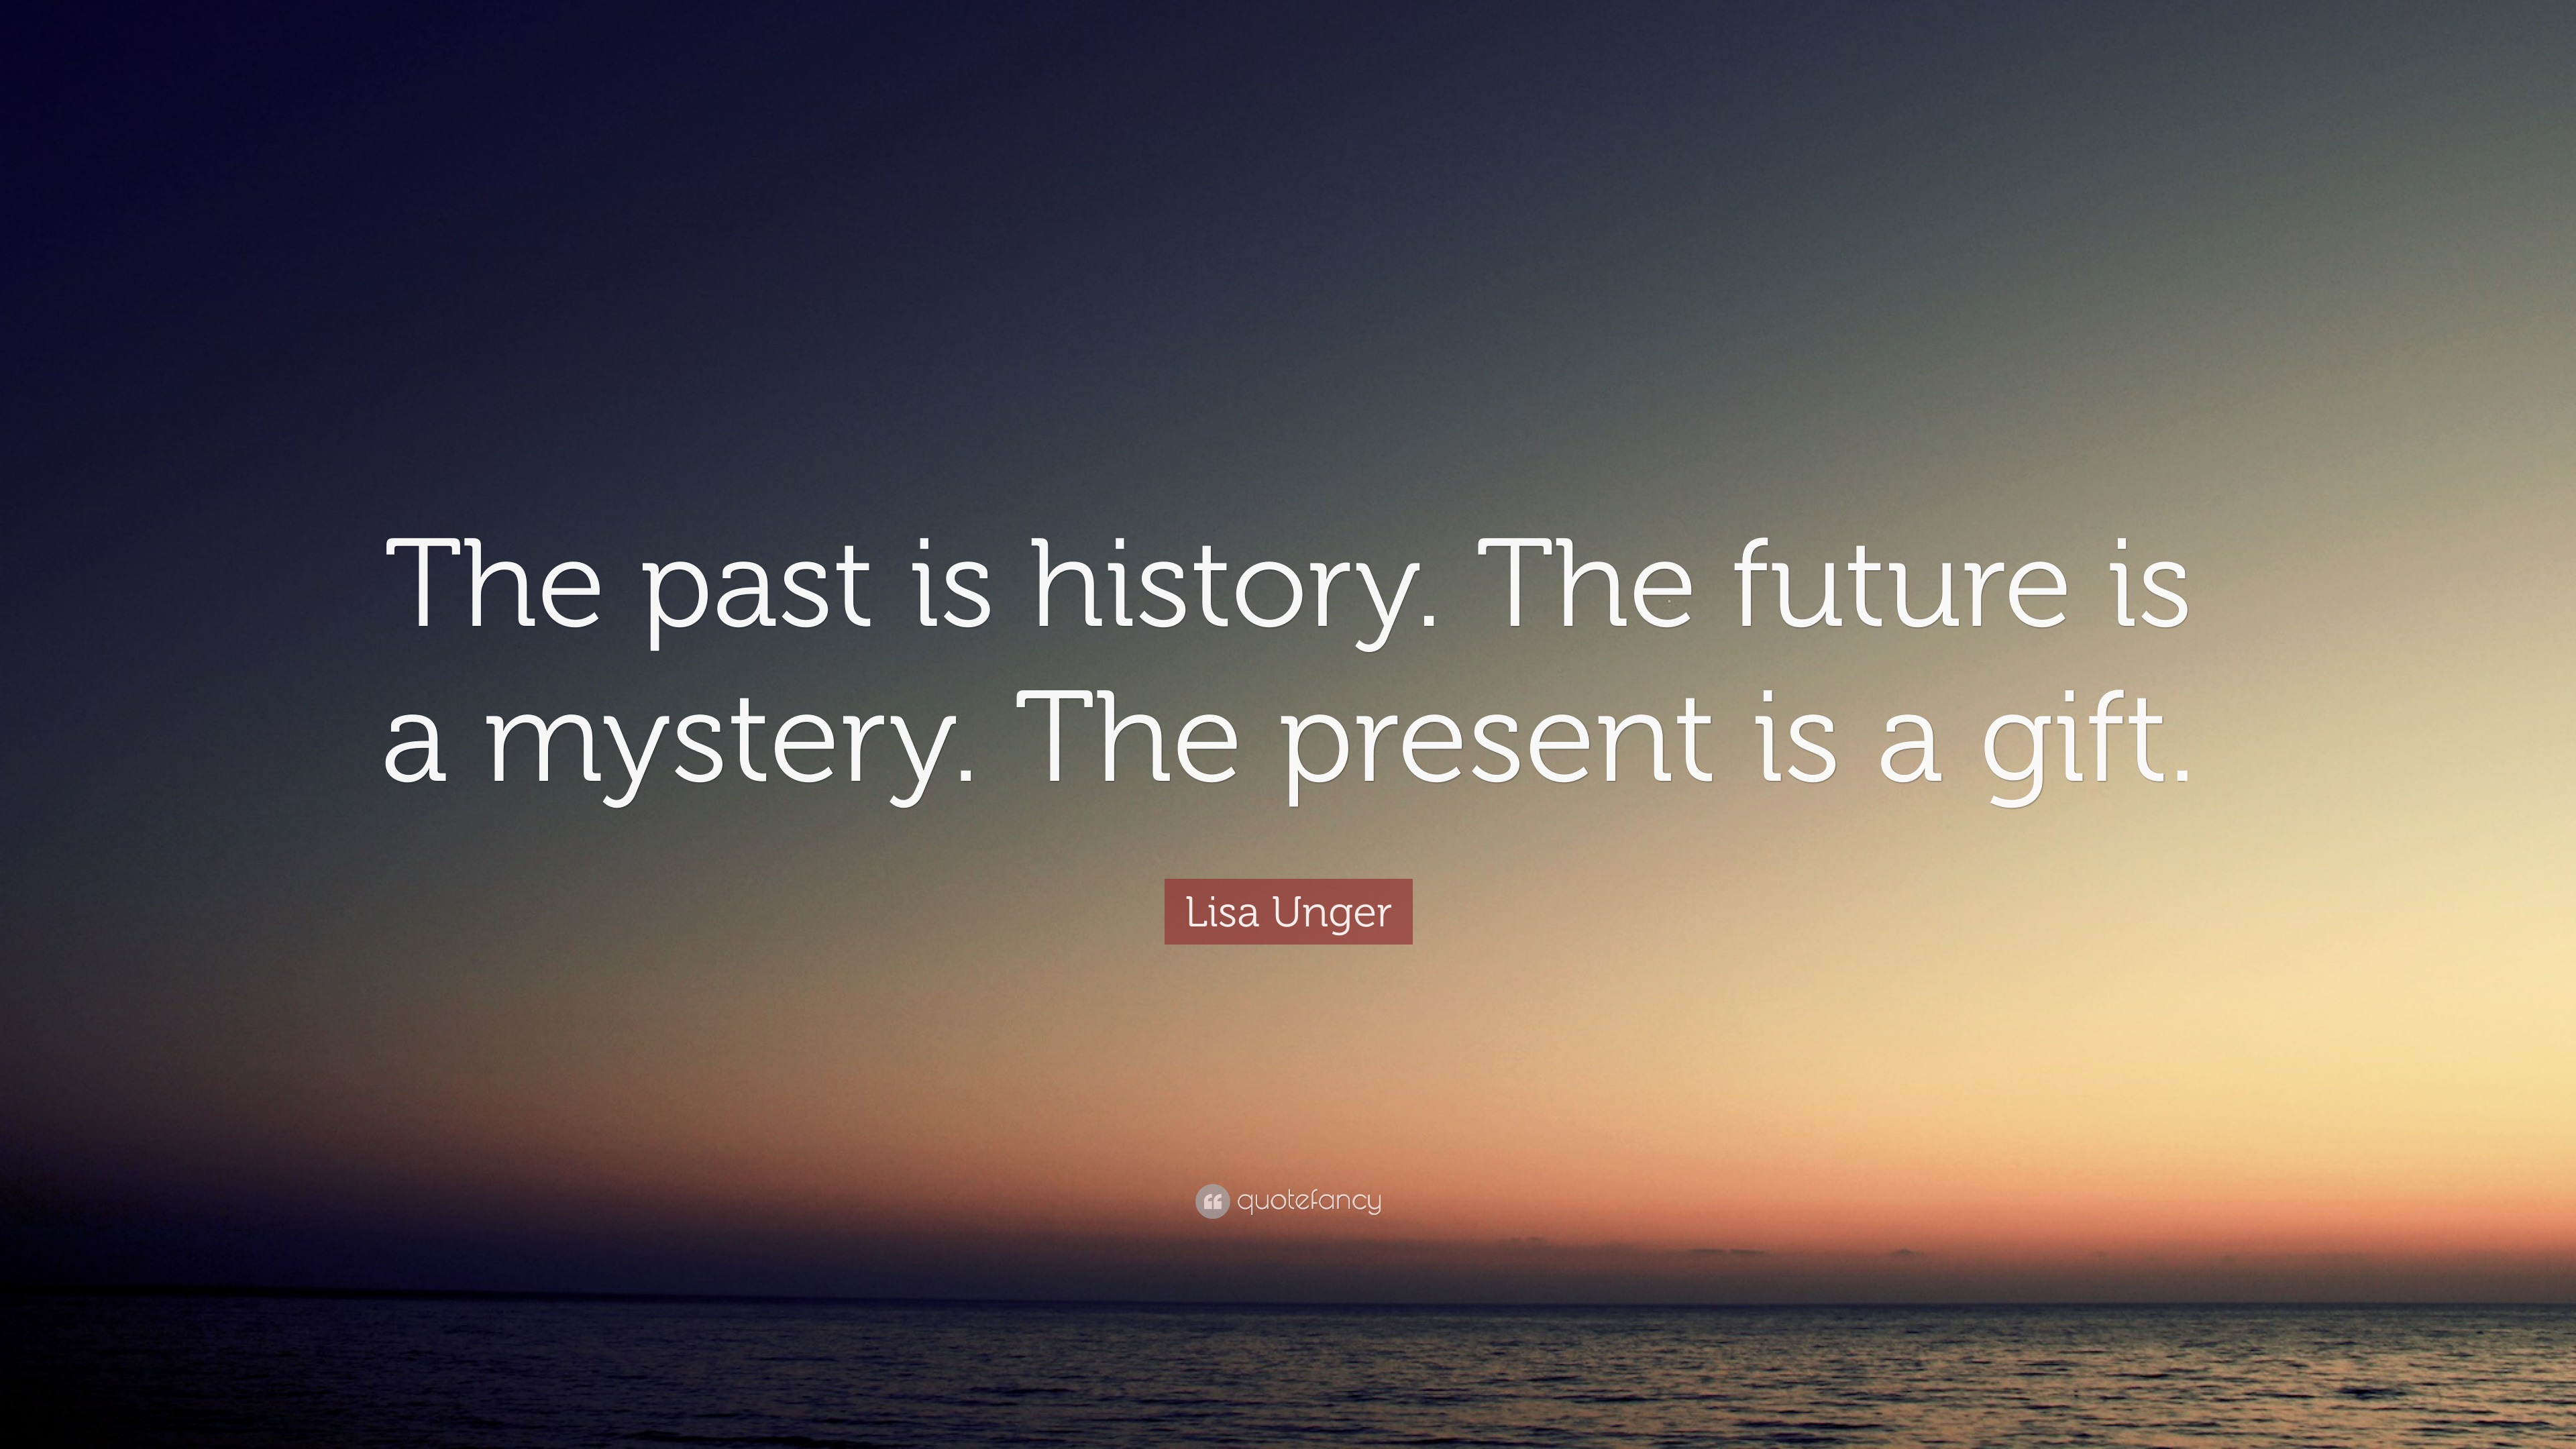 Lisa Unger Quote “The past is history. The future is a